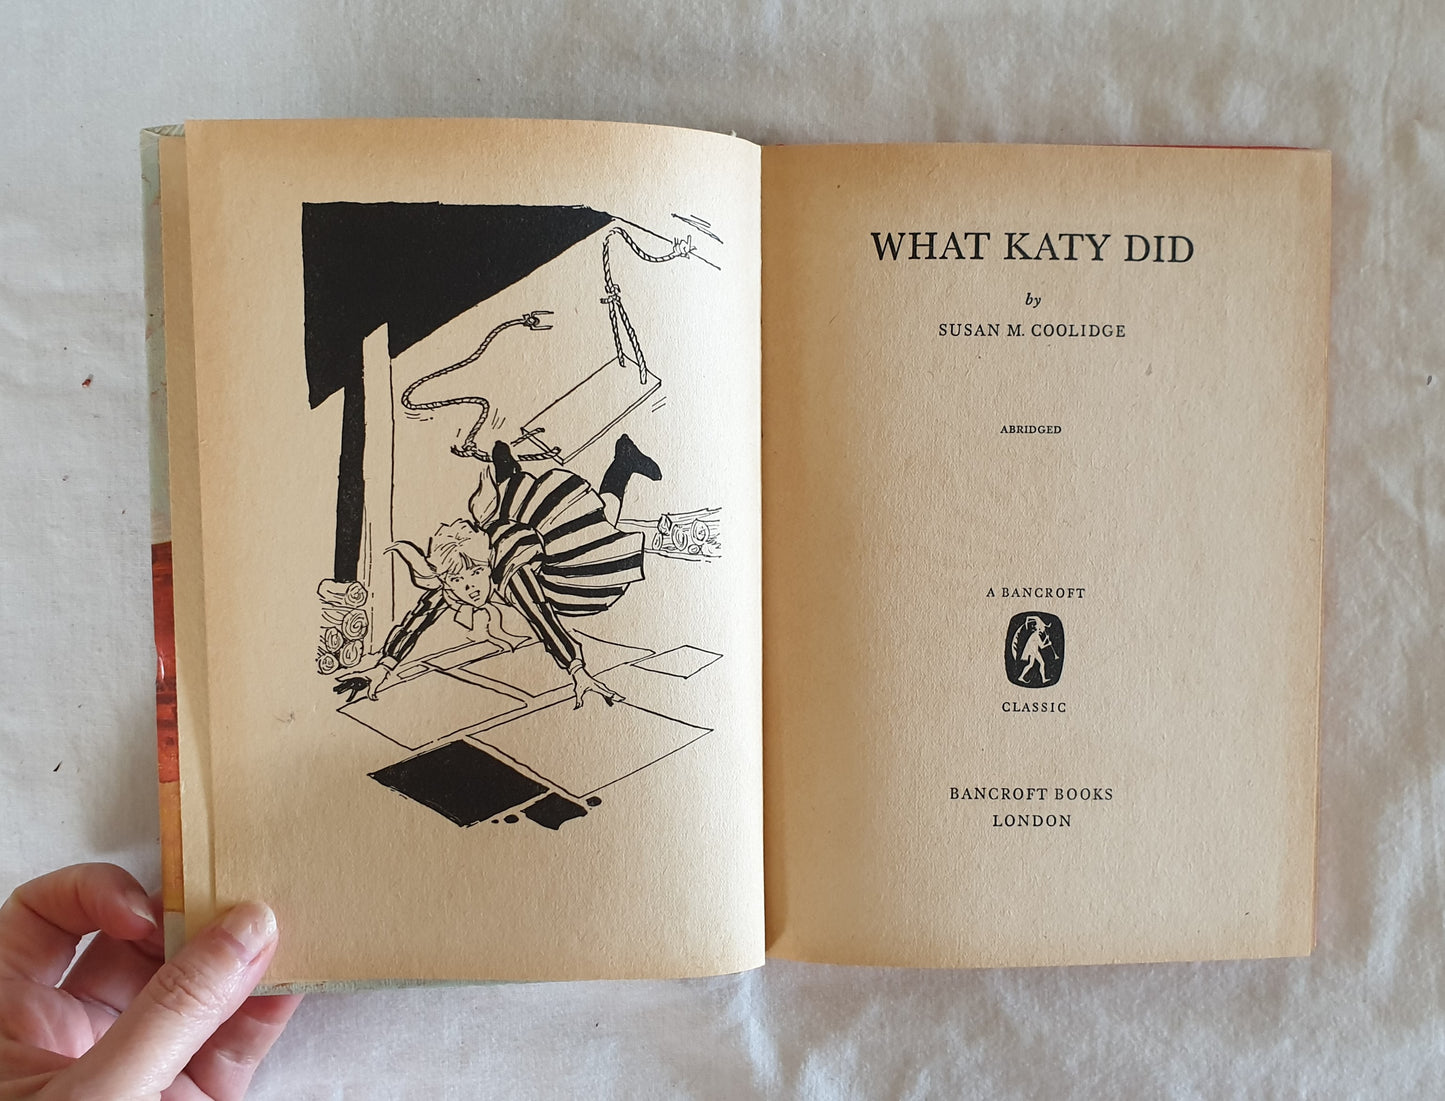 What Katy Did | What Katy Did Next by Susan Coolidge